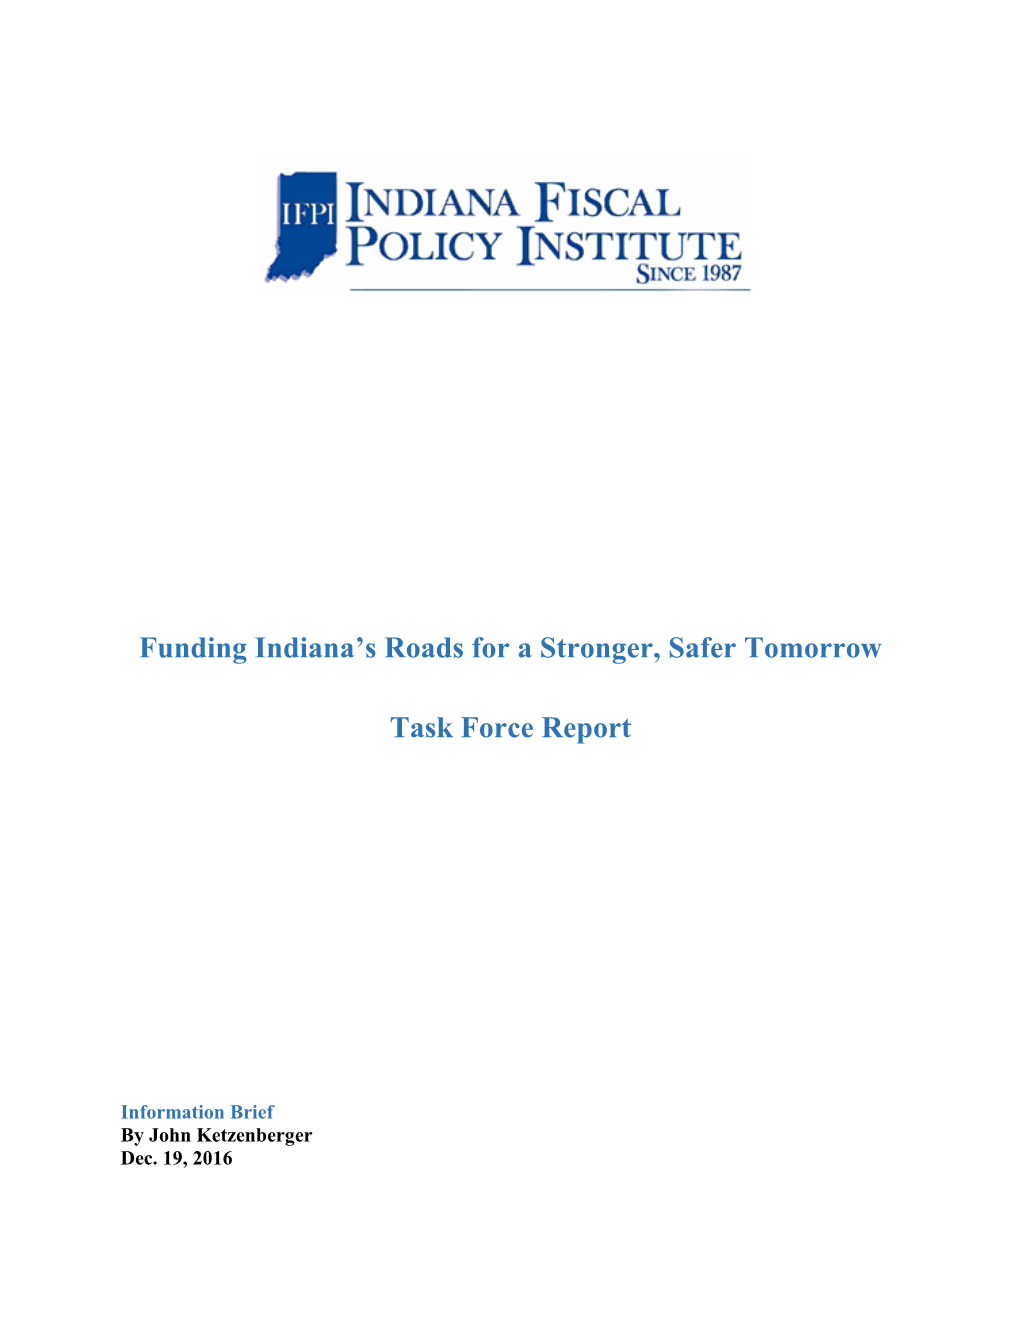 Funding Indiana's Roads for a Stronger, Safer Tomorrow Task